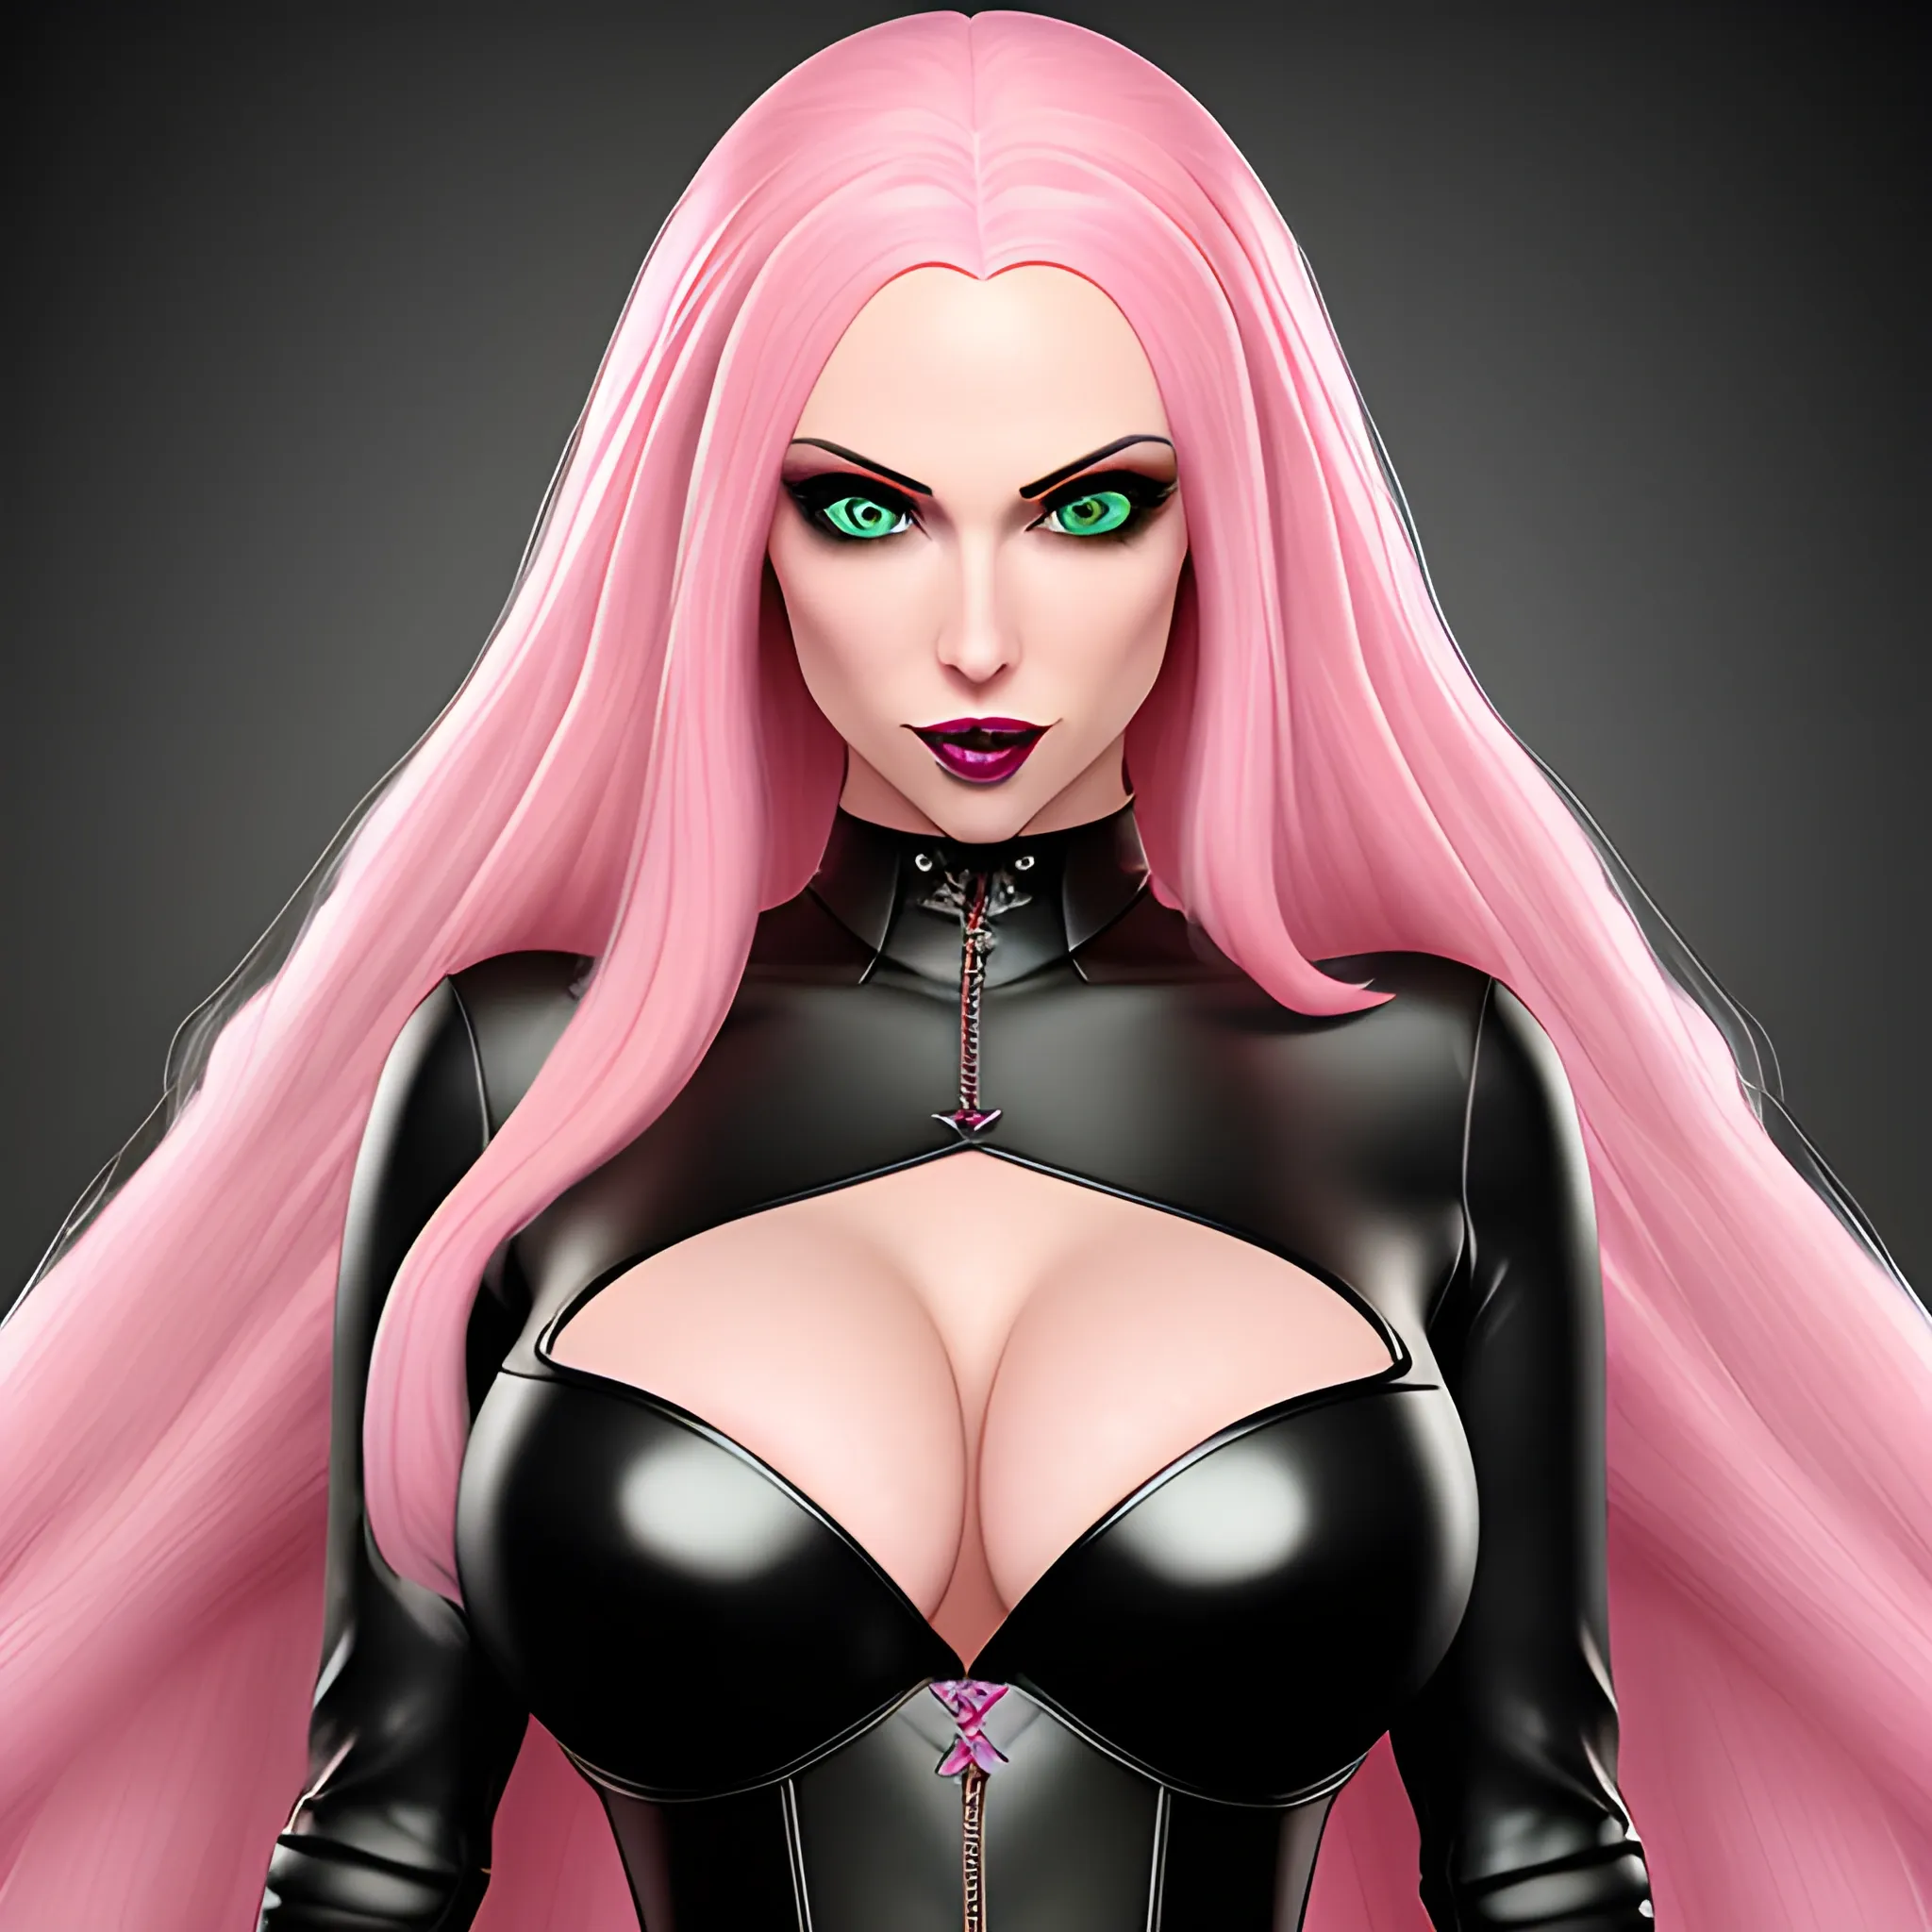 Create a photorealistic image of a cute young woman with long pink hair and light green eyes, she has small breasts, she wears a shiny dark medieval dress in latex and leather, breasts visible, pretty eyes, sweet mouth, whole body visible, highest level of detail